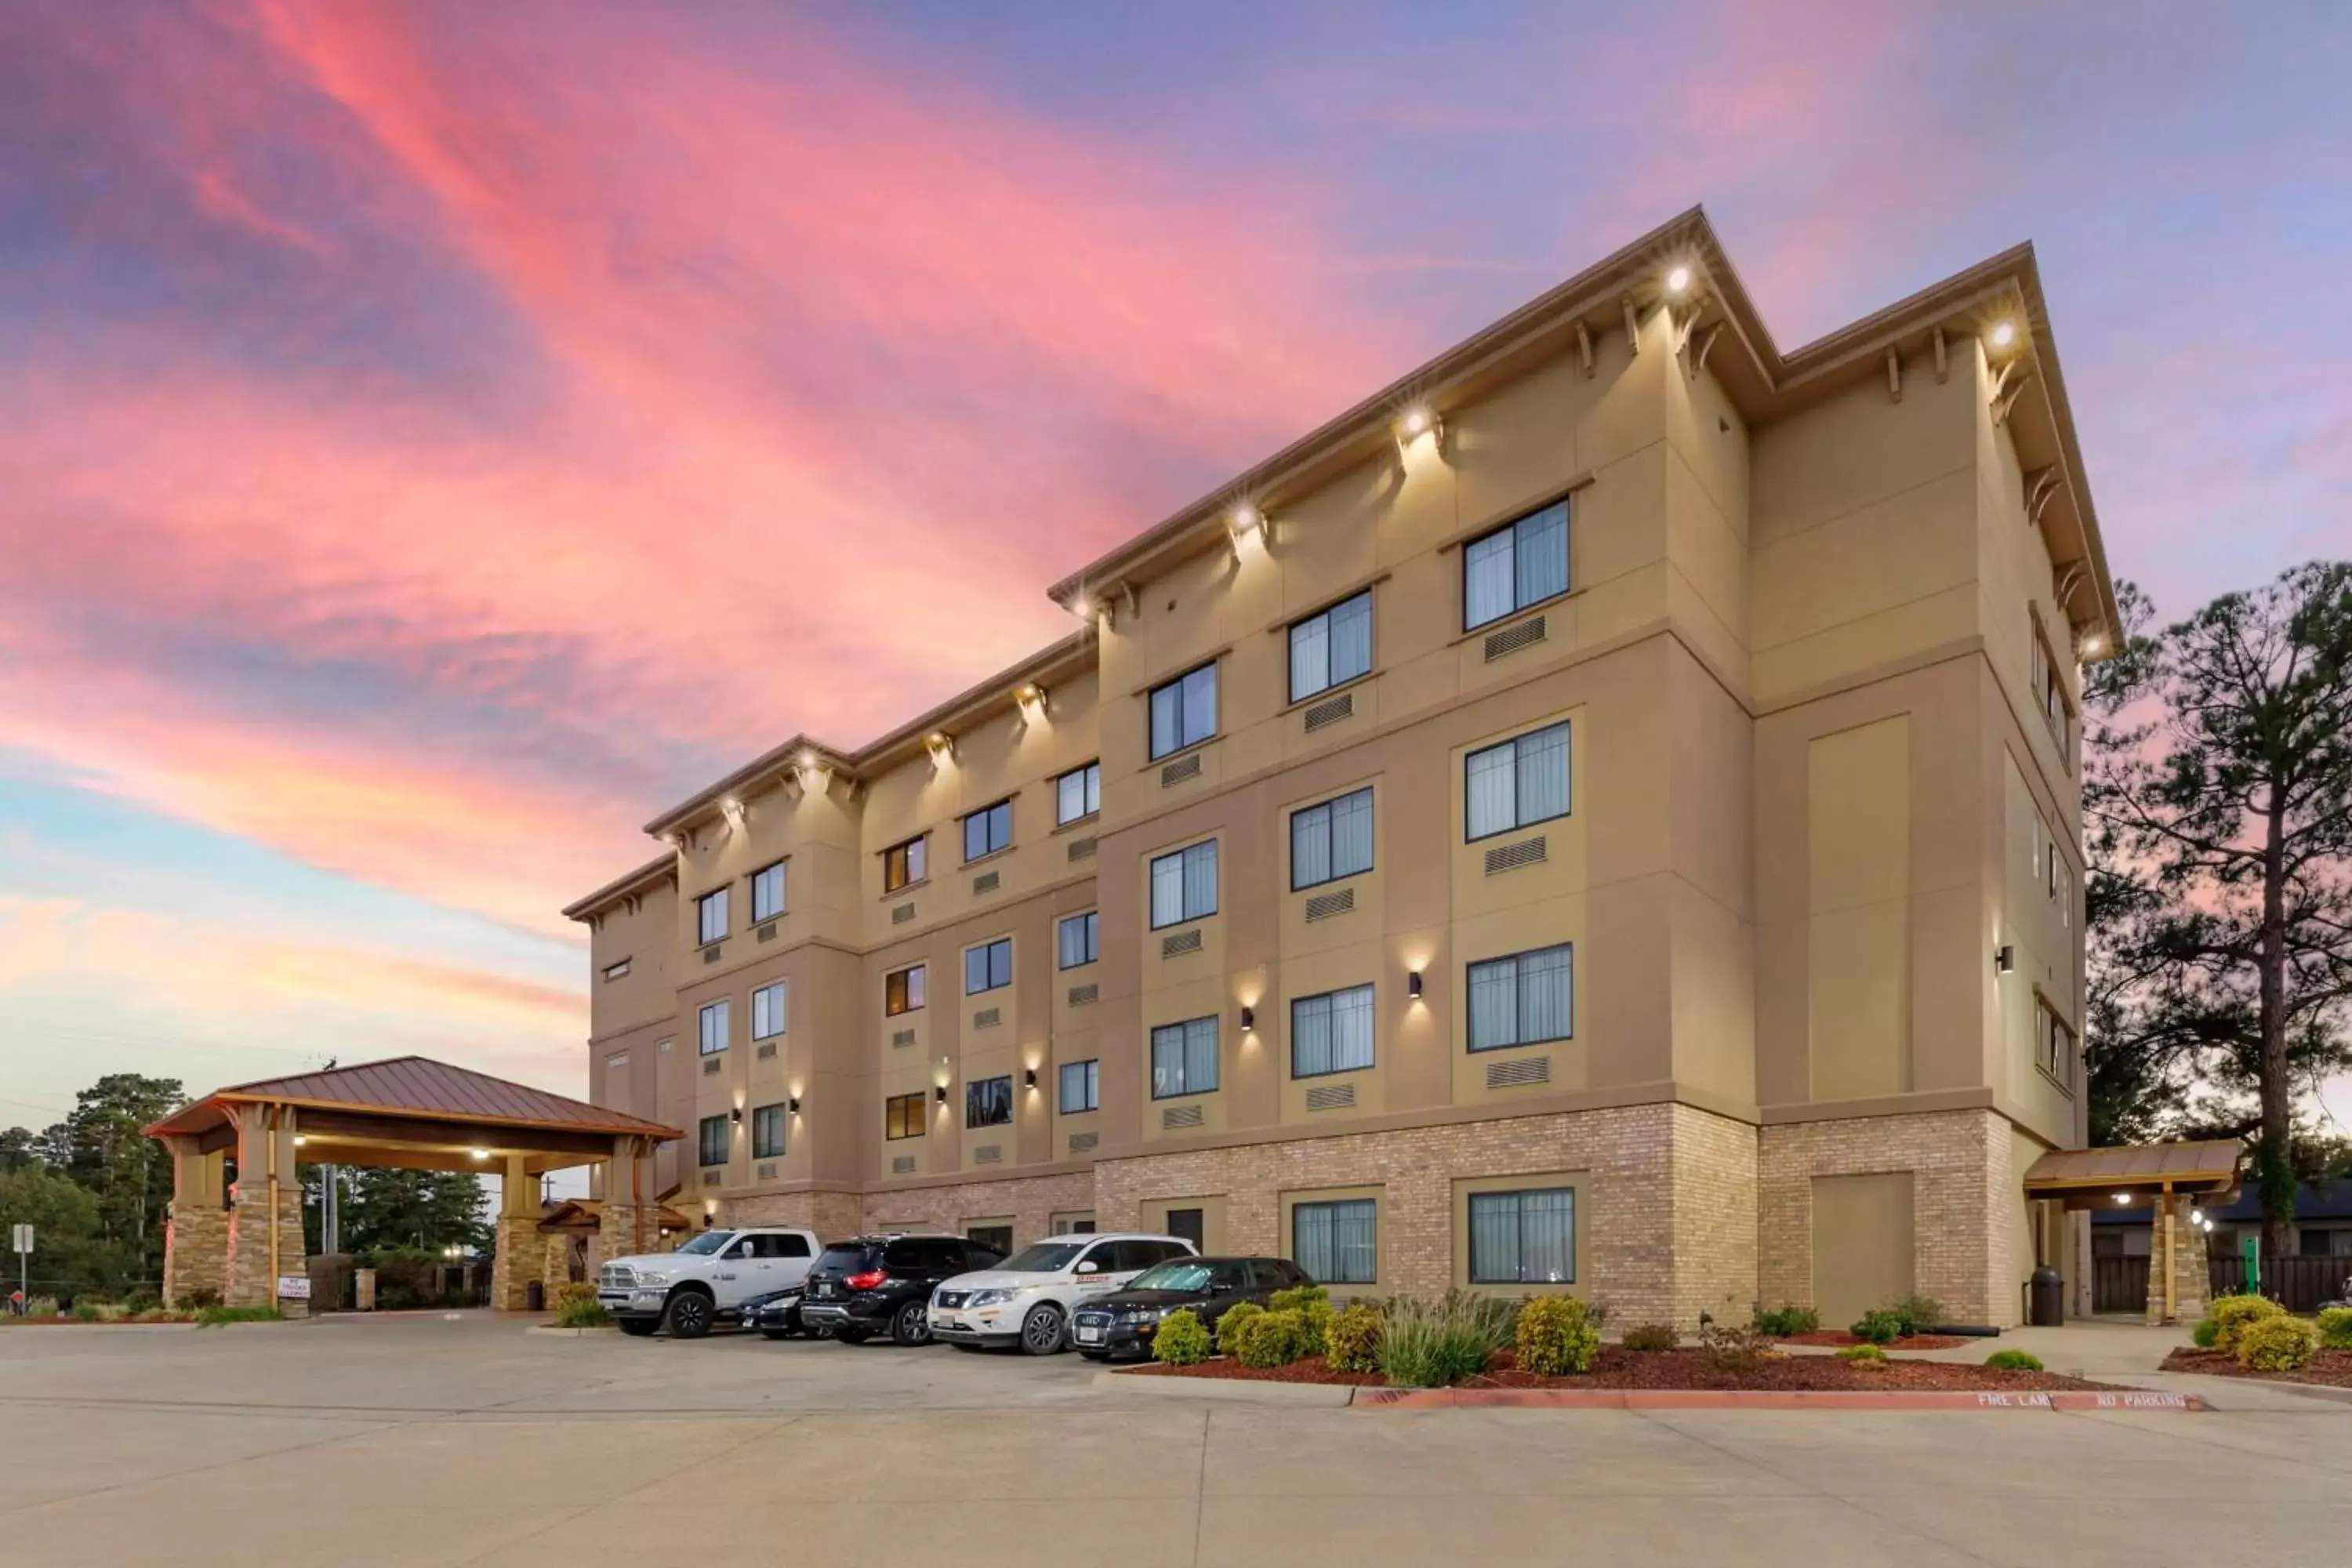 Property Building in Best Western Plus Classic Inn and Suites